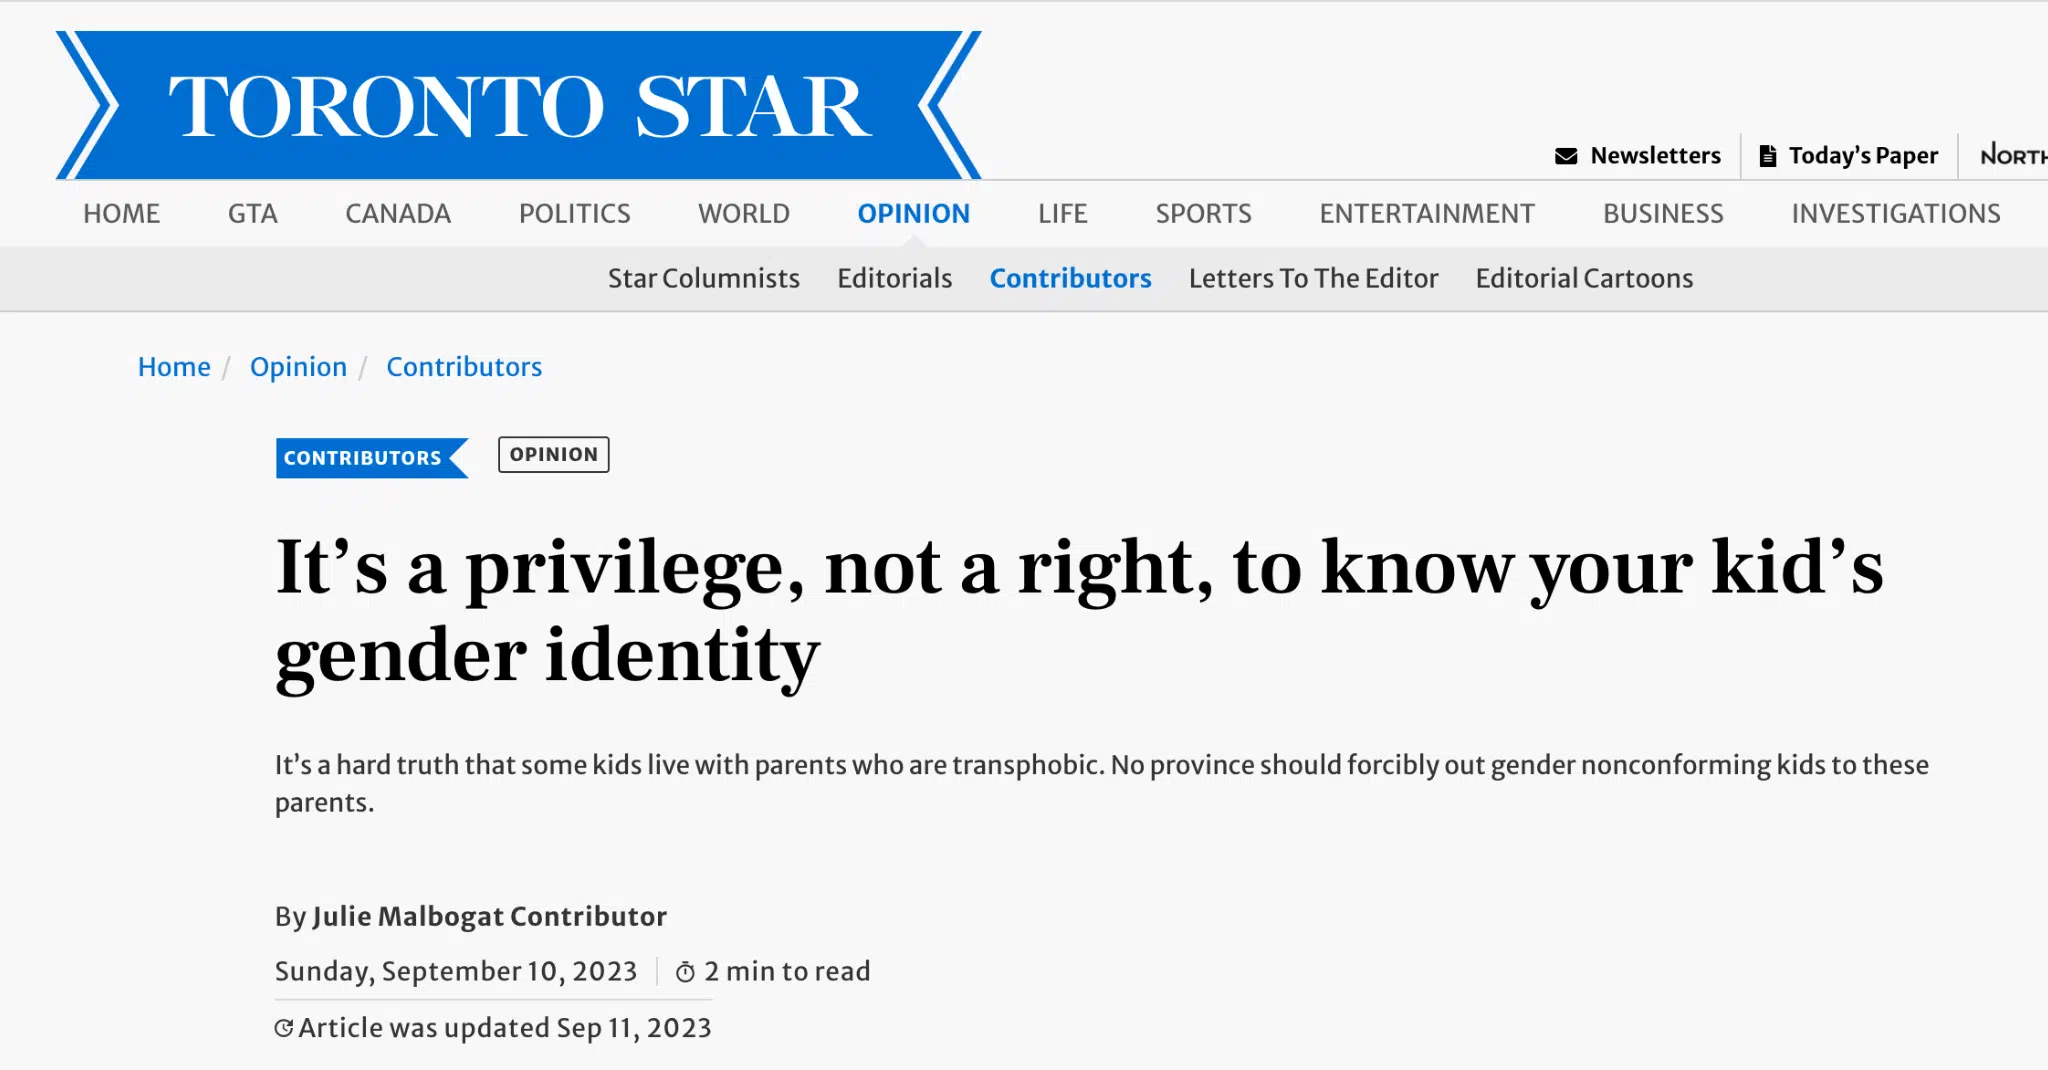 headline from the Toronto Star on parents' right to know their children's gender identity